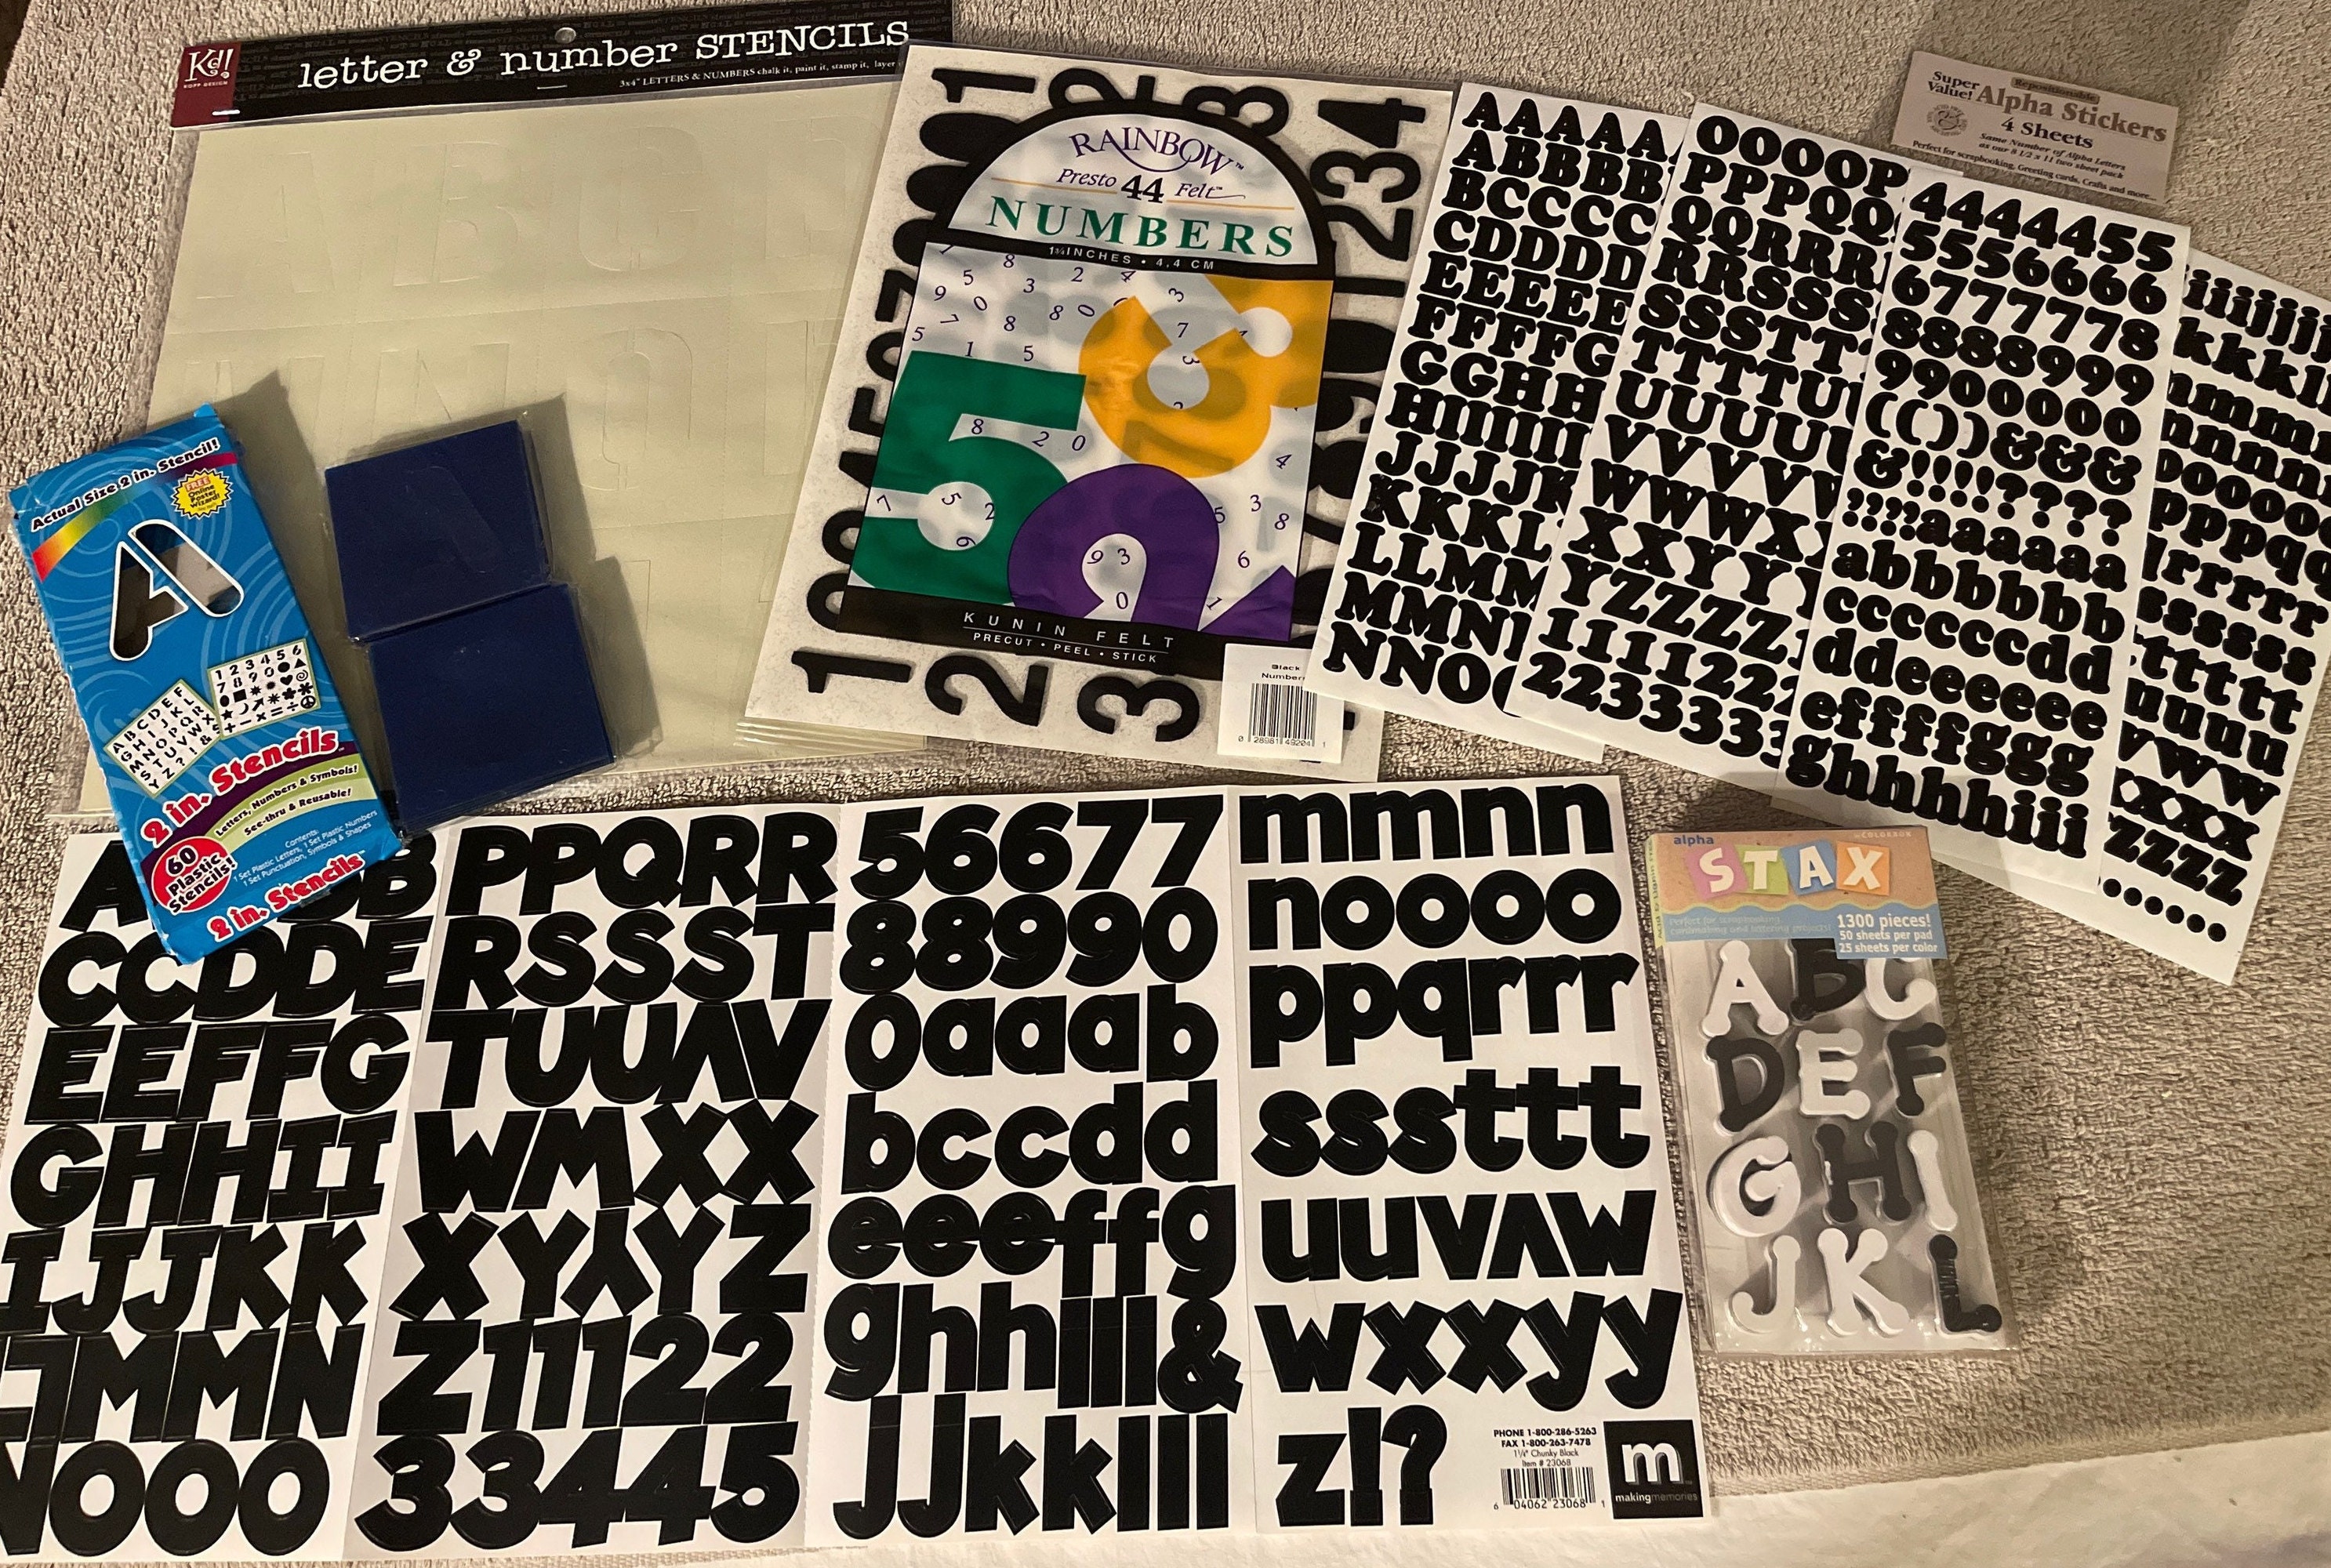 2 Inch Letters, Peel and Stick, Self Adhesive Felt Alphabet or Numbers 0-9  Felt Letter Stickers. 